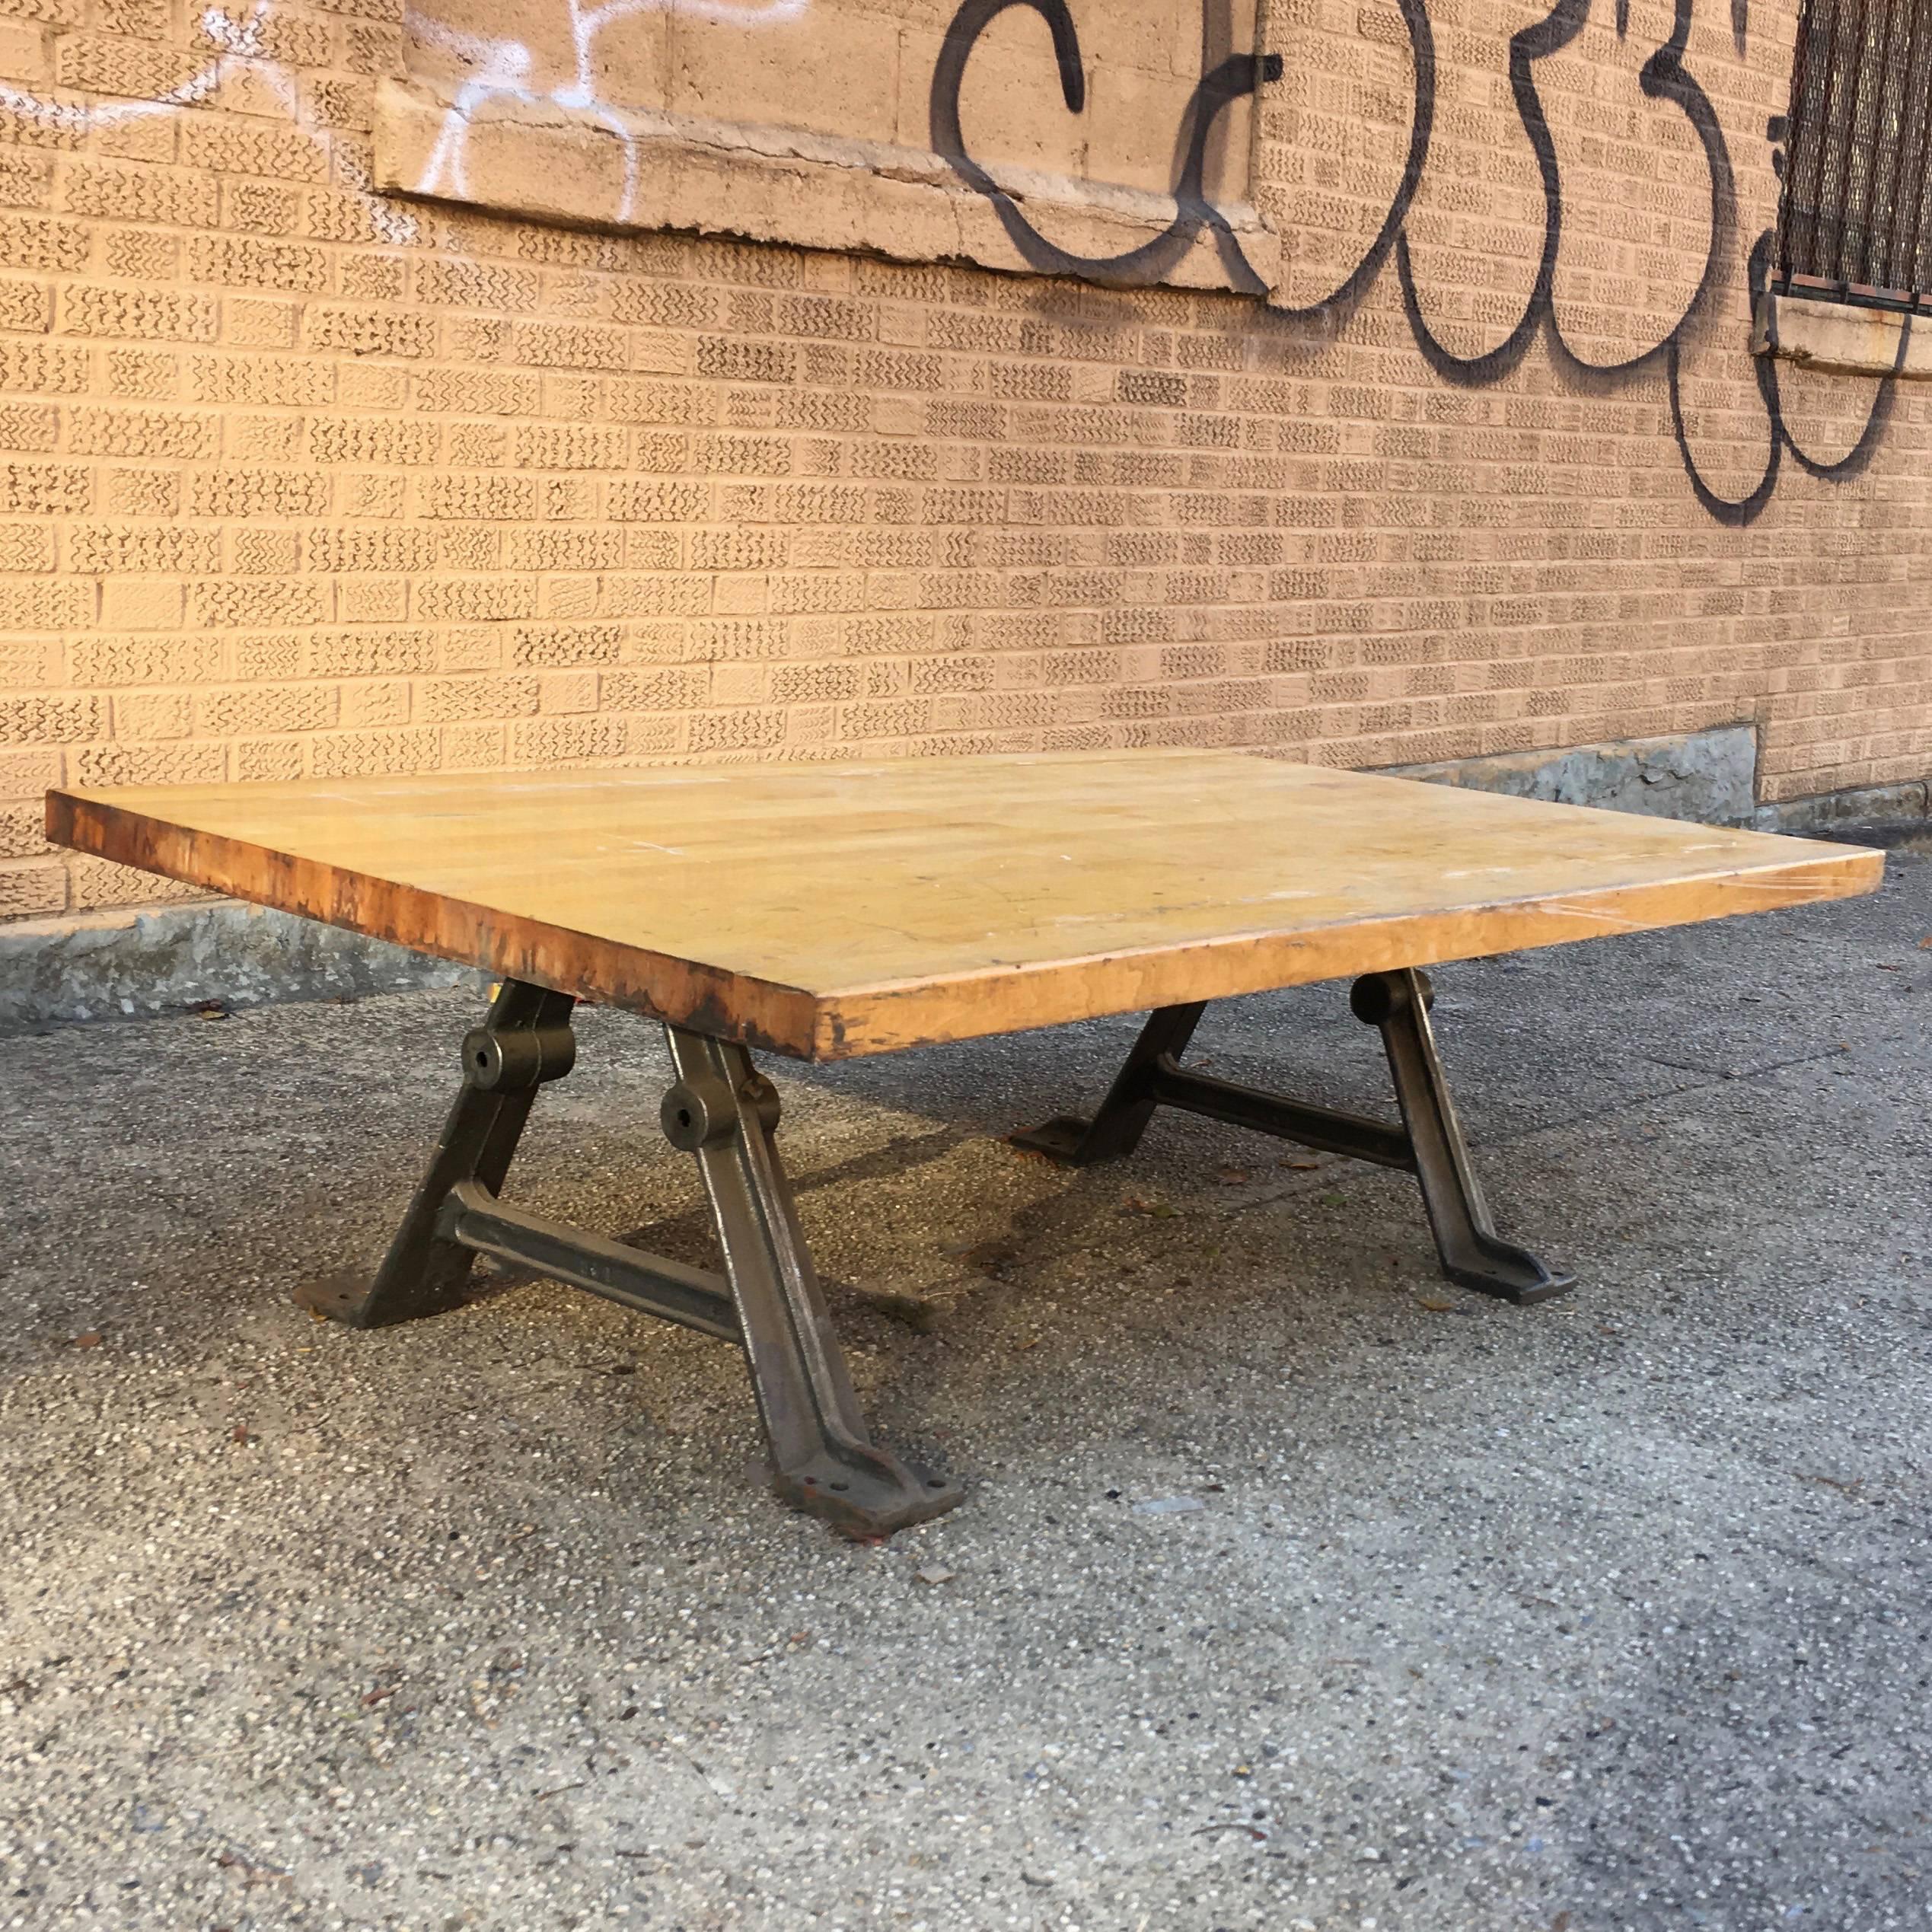 Custom, Industrial coffee table features a reclaimed, maple butcher block top and cast iron, machine legs assembled by cityFoundry in Brooklyn for our CF Signature Line.